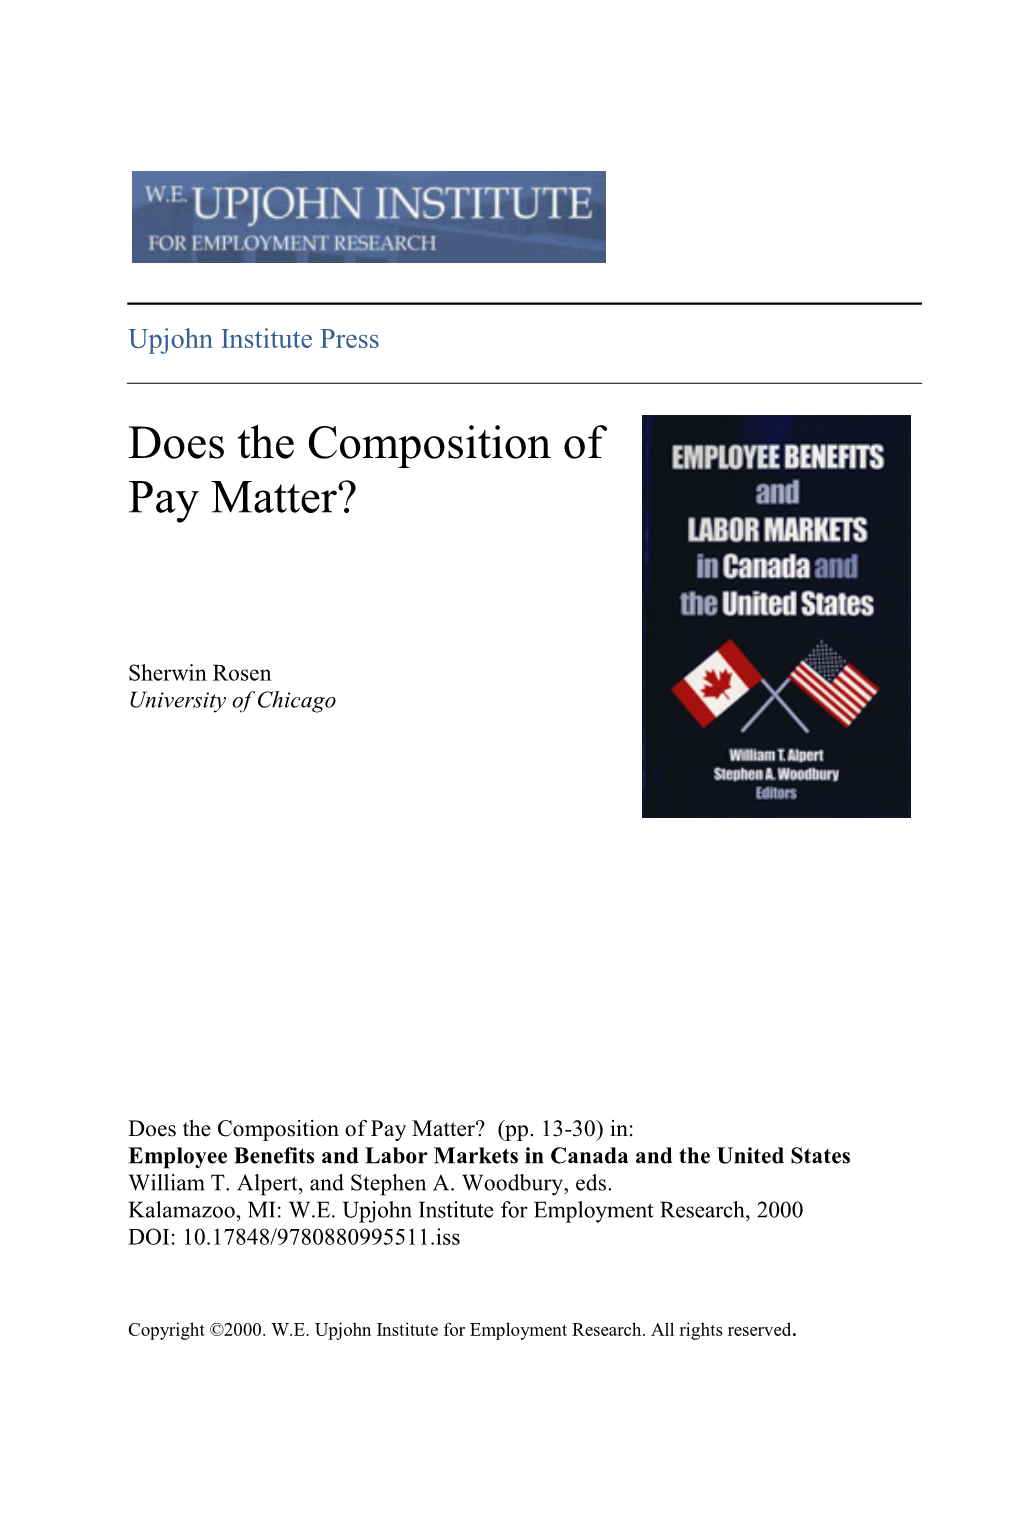 Does the Composition of Pay Matter?